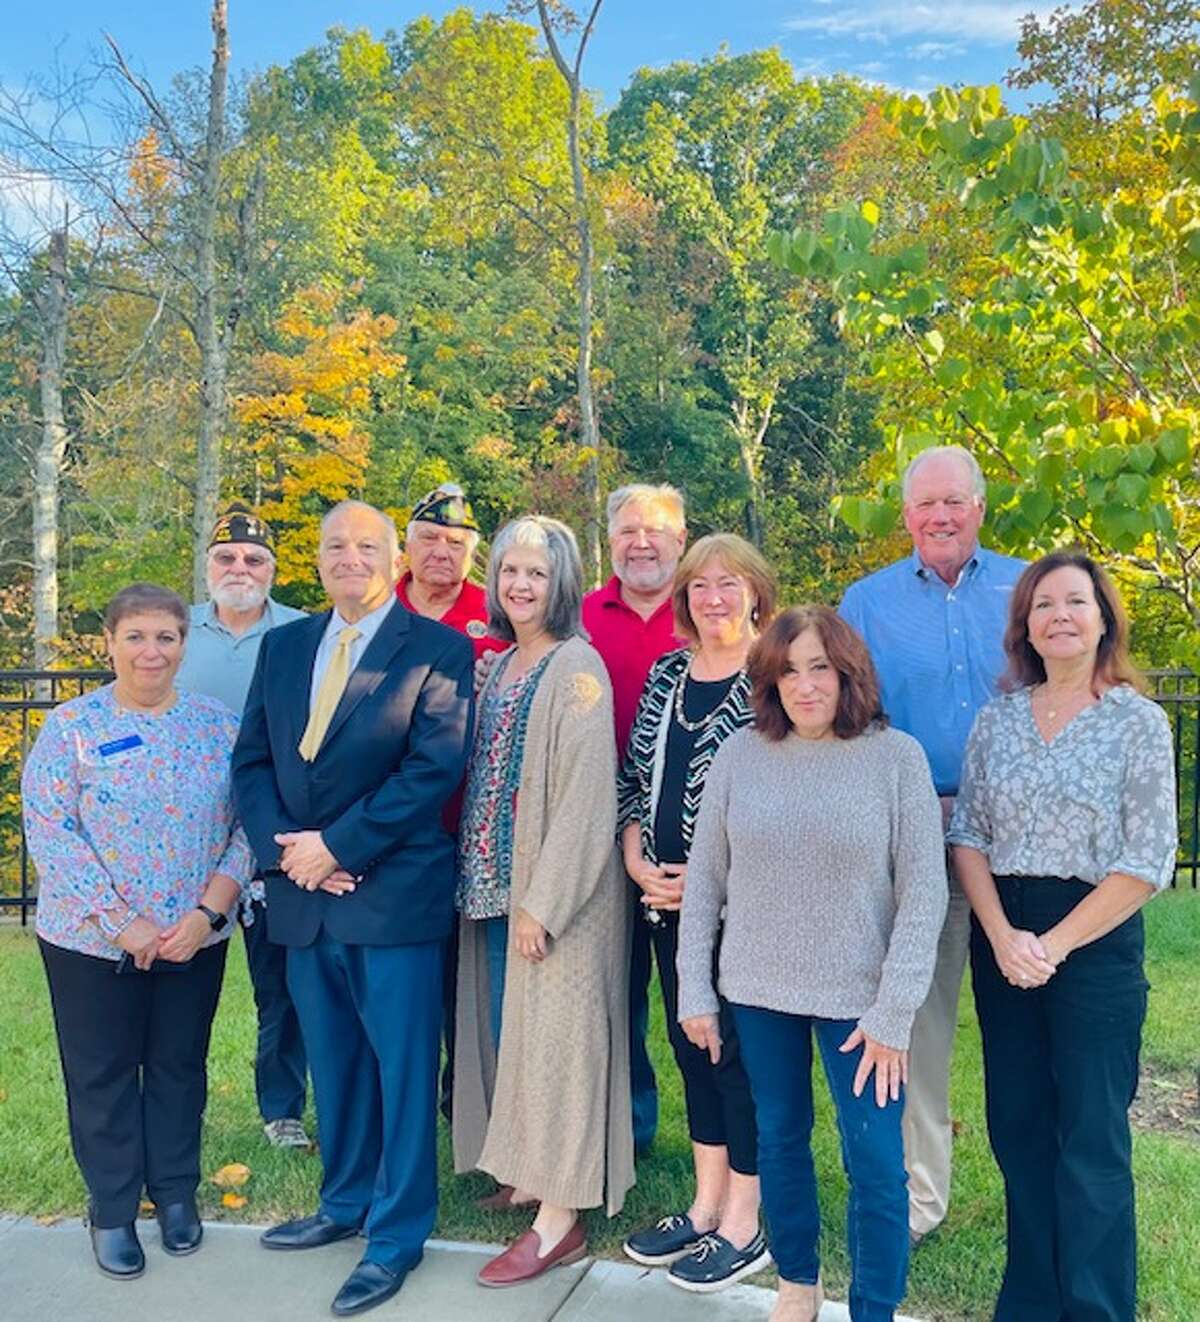 Representatives from Trumbull's veterans, Rotary and police, from left: Beth Stoller, Graham Bisset, Police Chief Michael Lombardo, Ernie Foito, Sue Stonaha, Preston Merritt, Holly Sutton-Darr, Kathi Eigenrauch, Ray Baldwin, and Mary Beth Thornton 